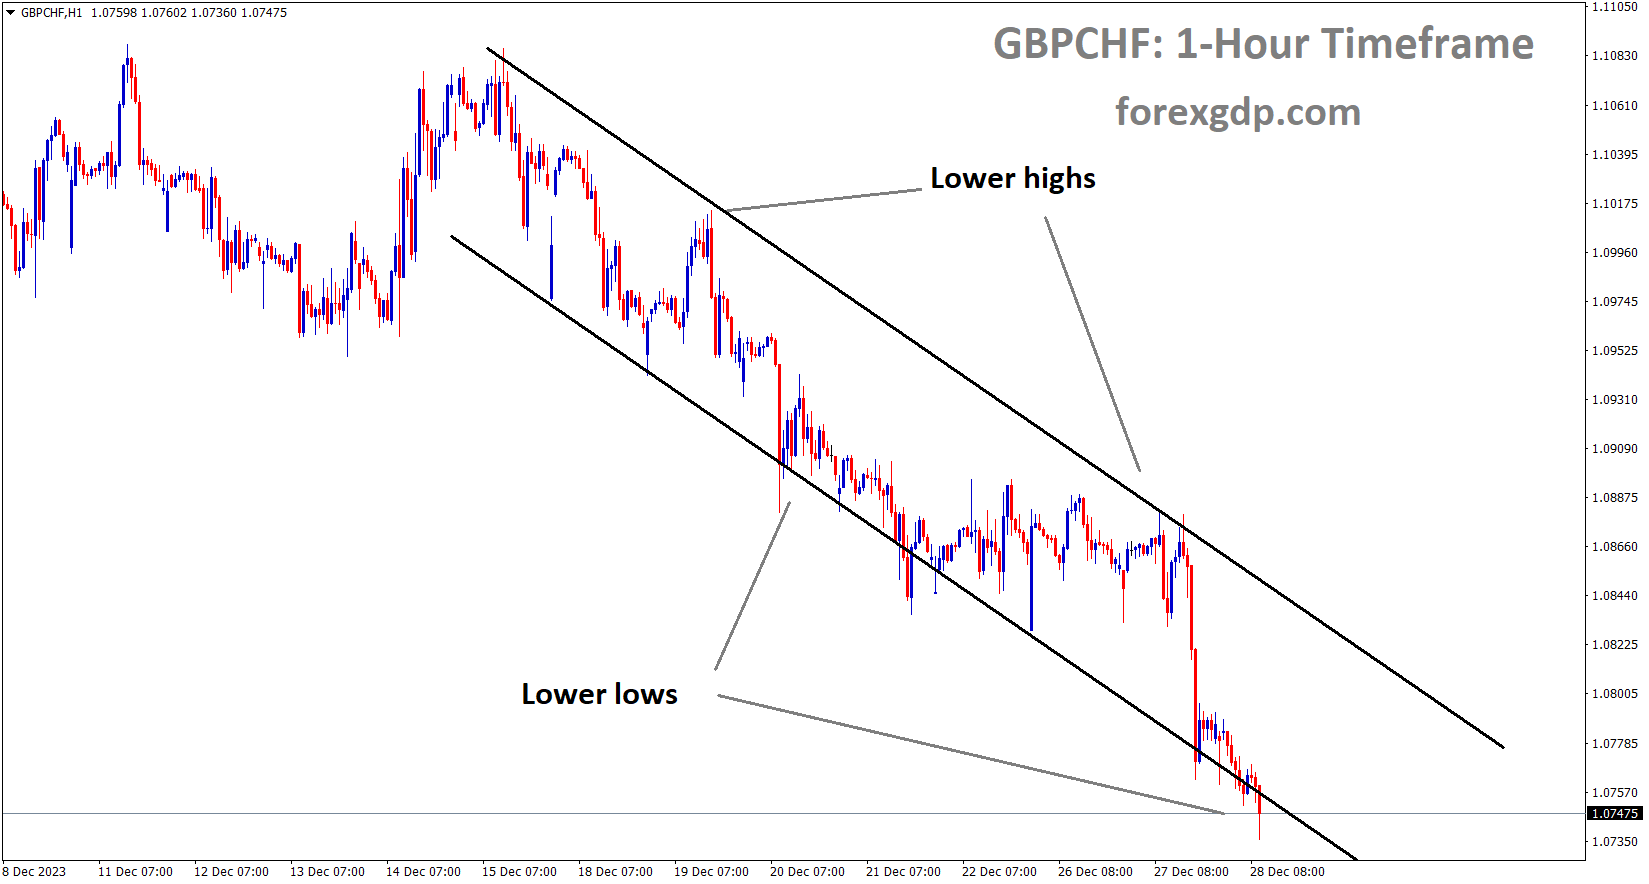 GBPCHF is moving in the Descending channel and the market has reached the lower low area of the channel